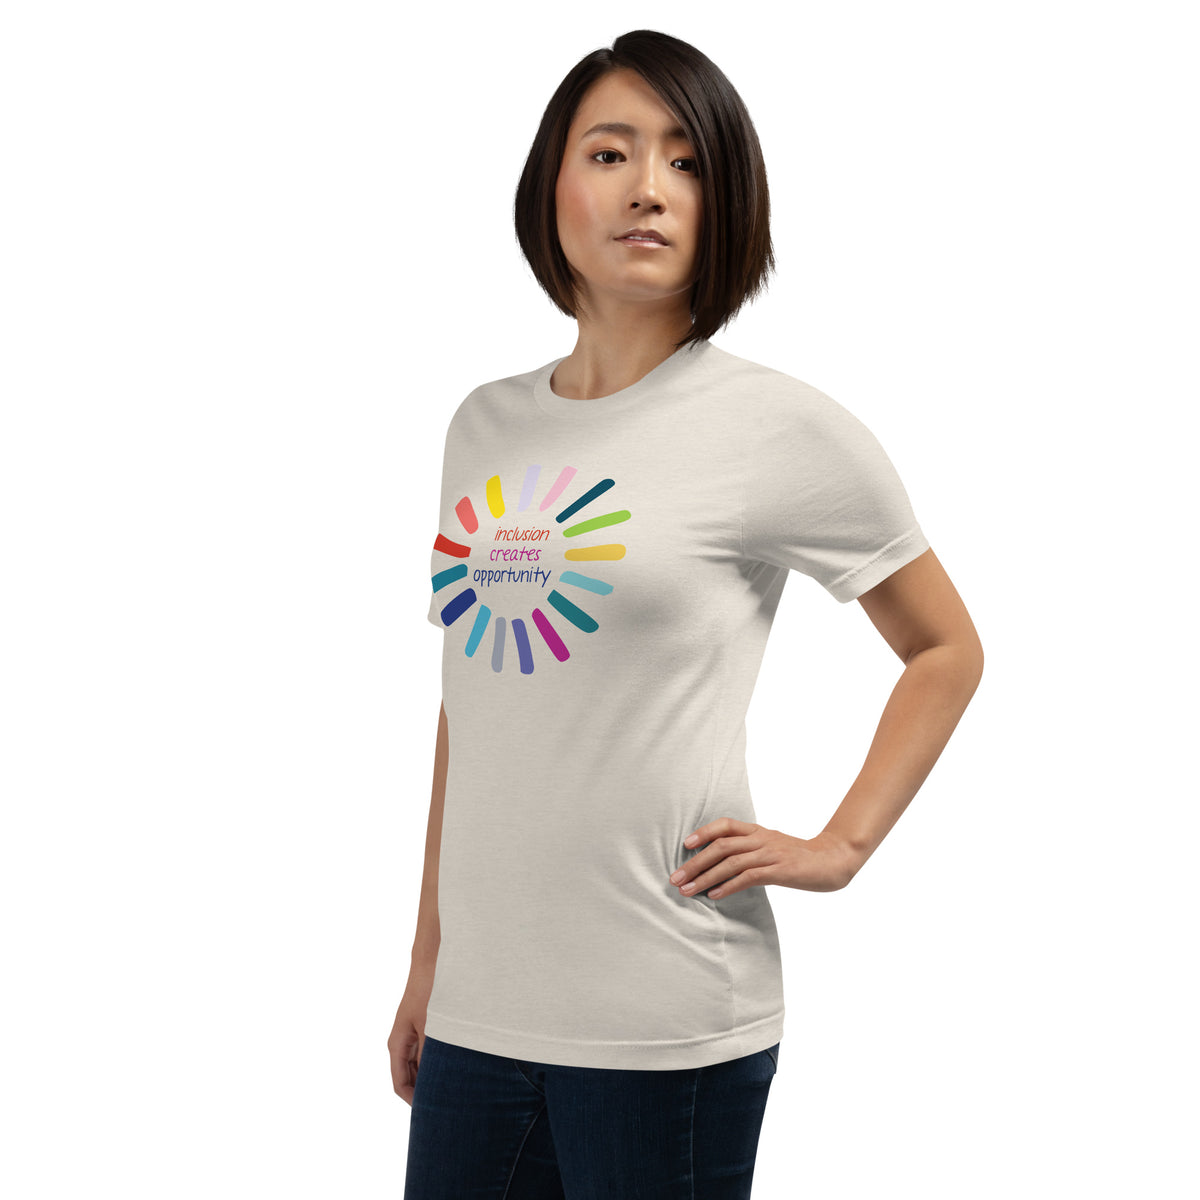 TPCNS Inclusion Creates Opportunity Classic Tee